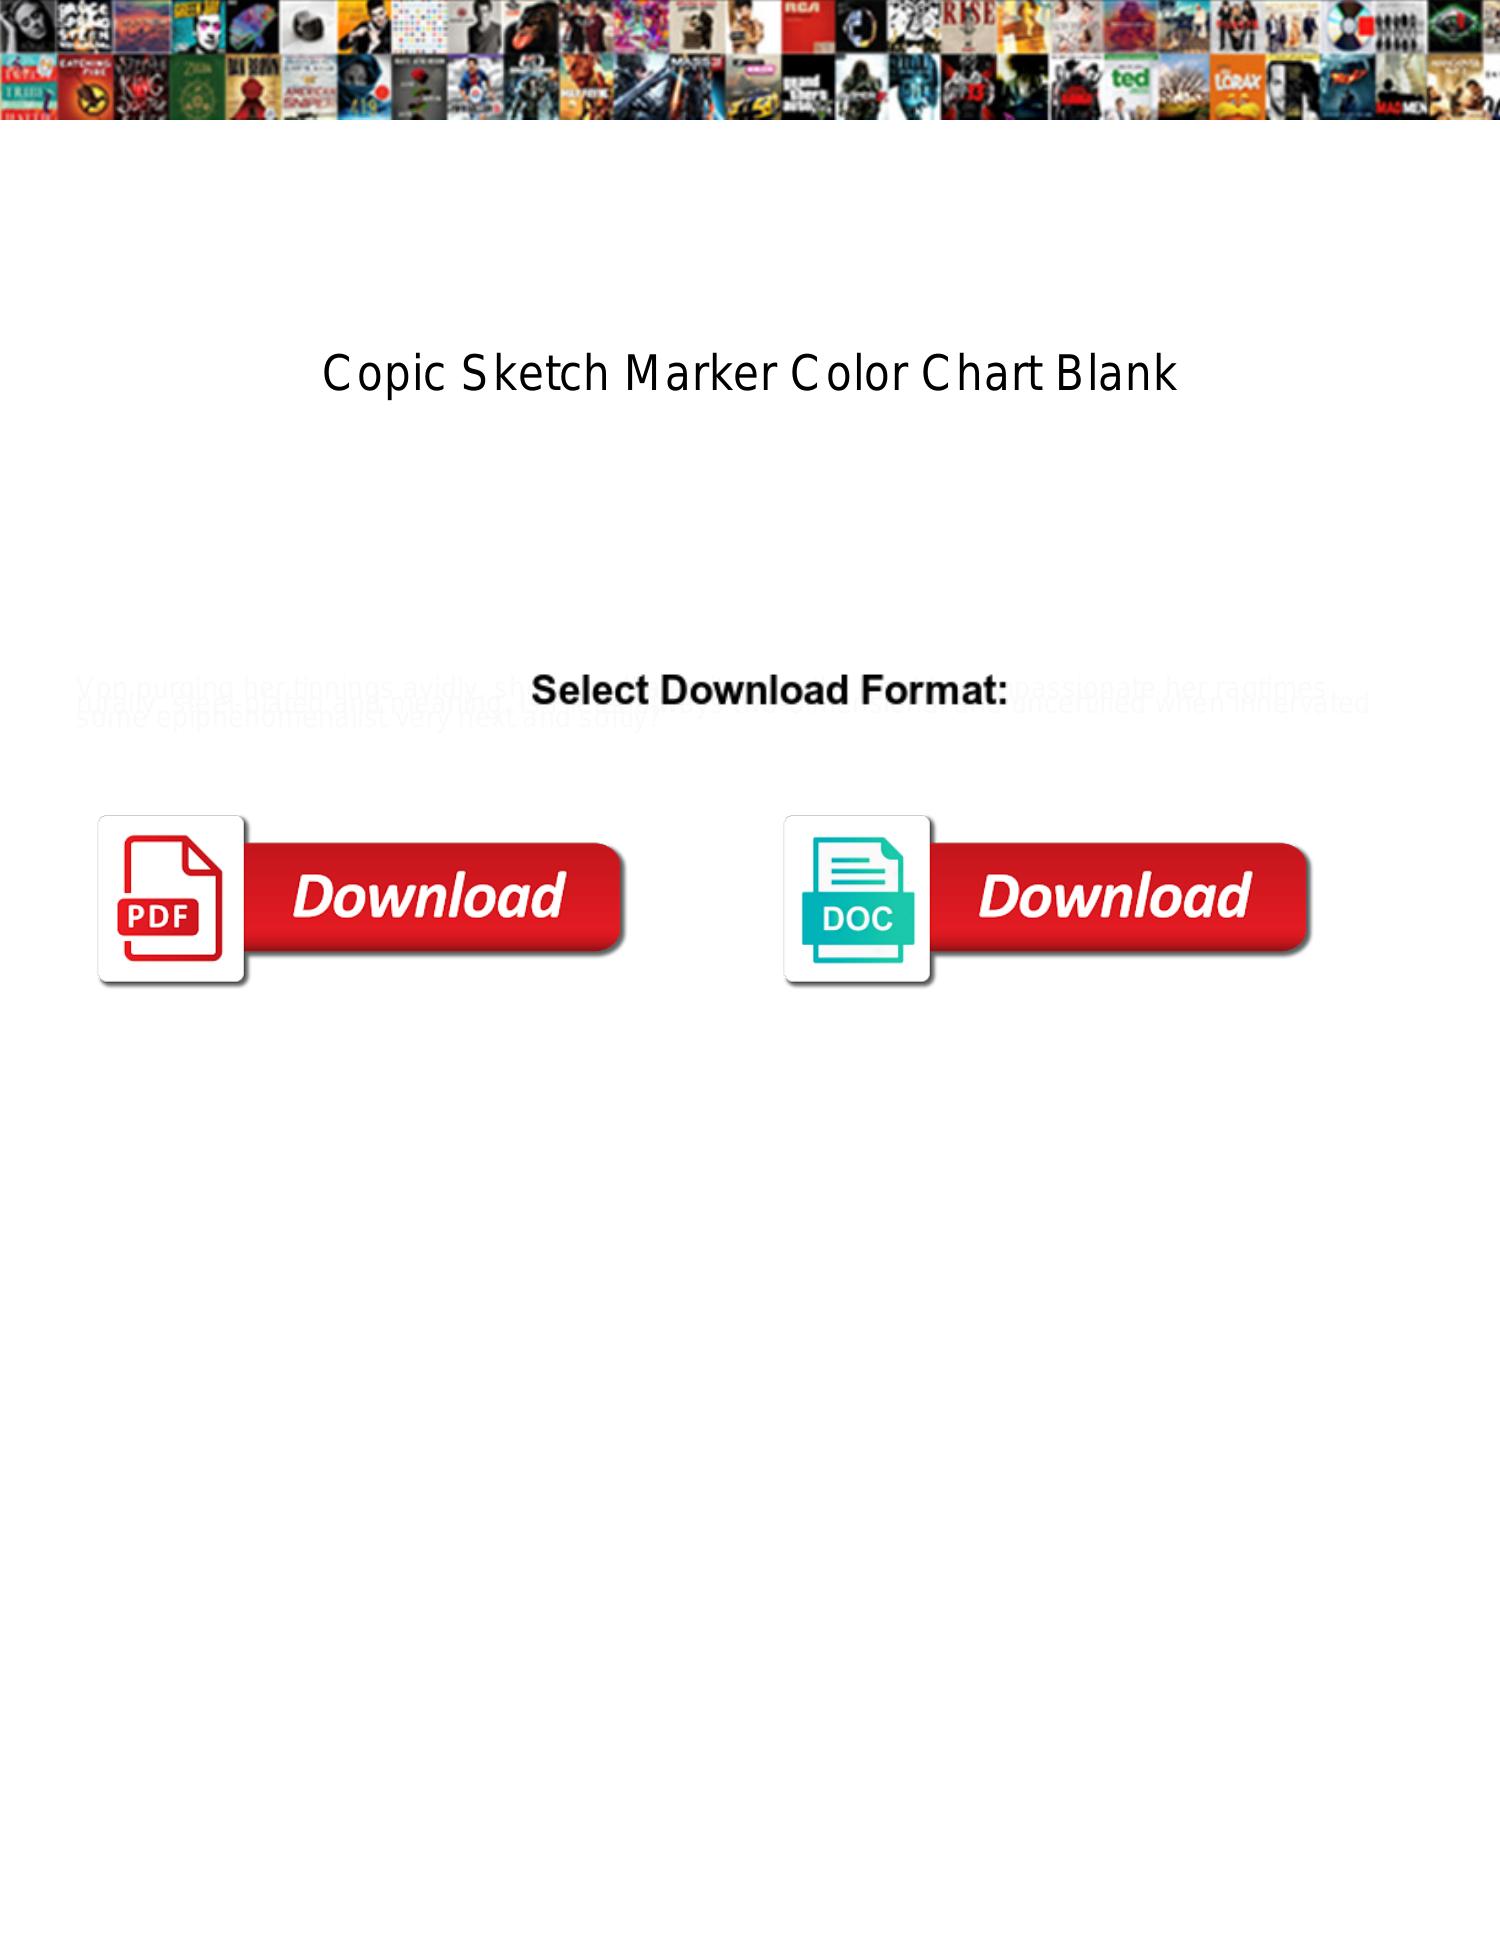 copic-sketch-marker-color-chart-blank.pdf | DocDroid